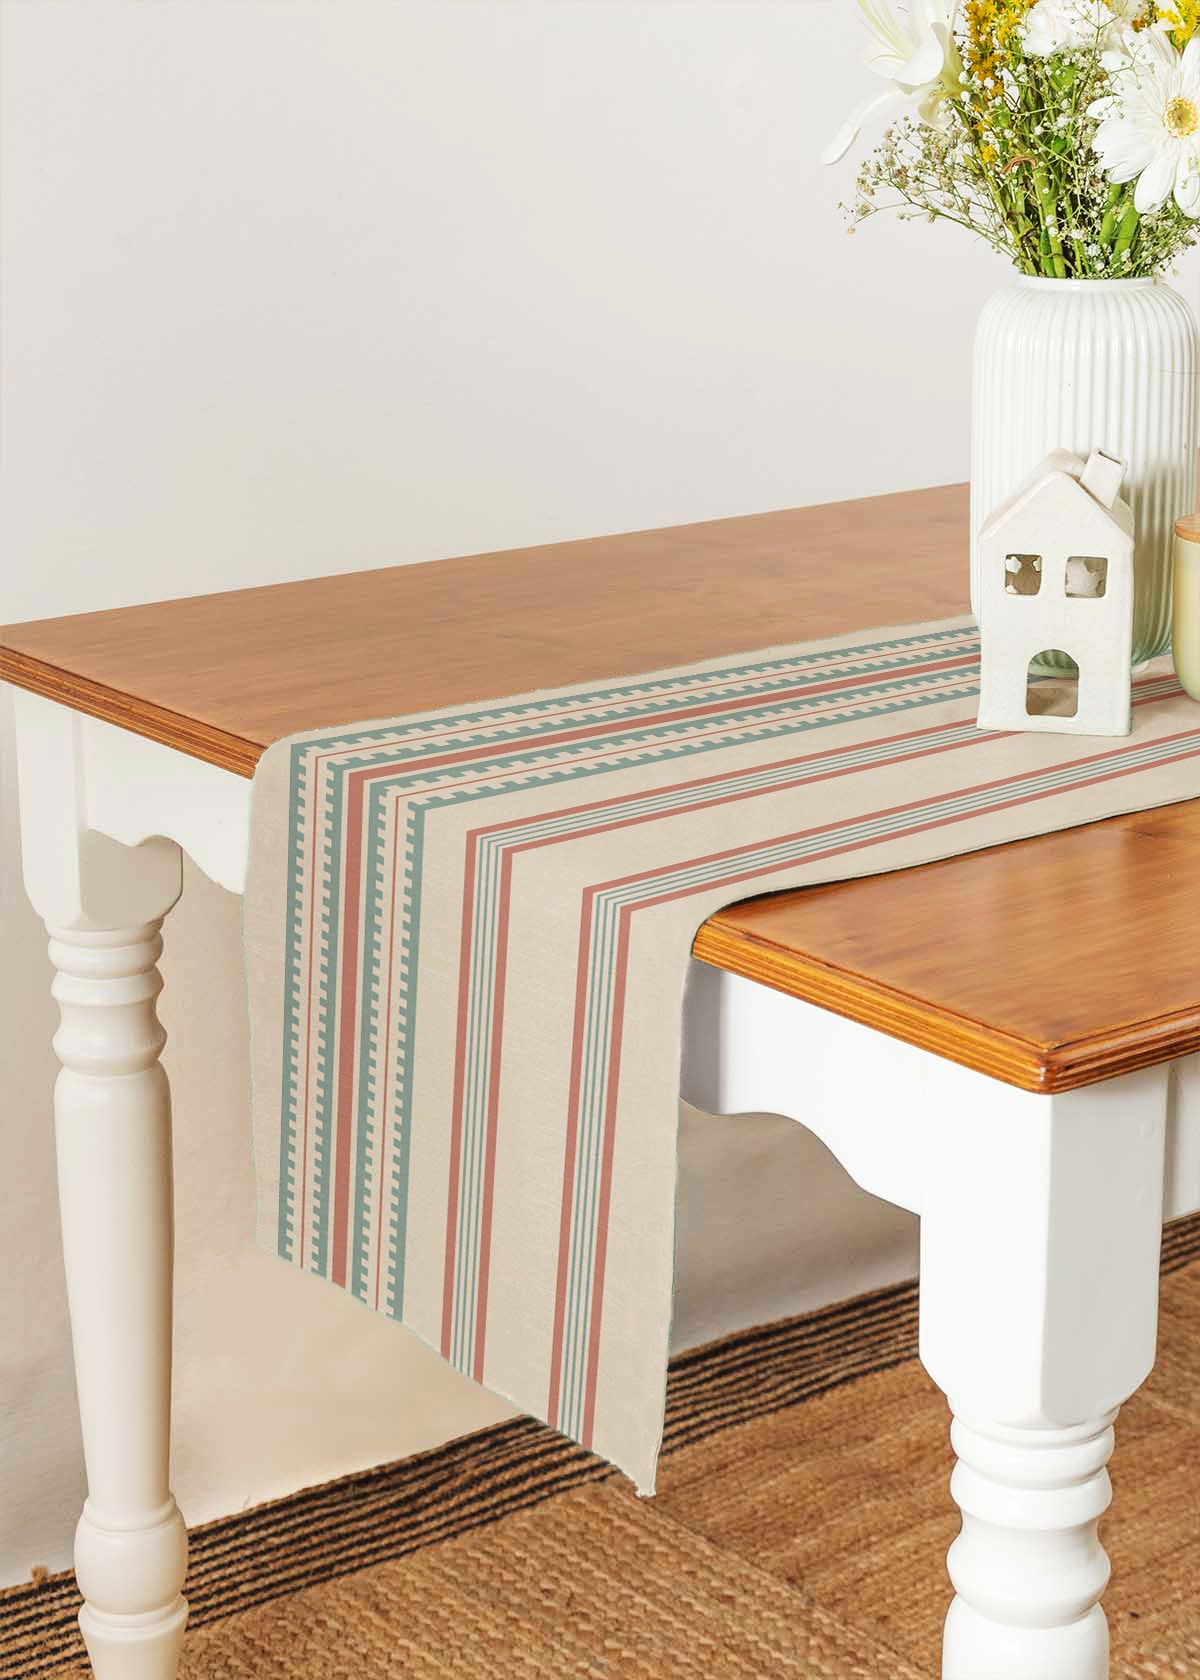 Roman stripes 100% cotton customisable geometric table Runner for dining - Rust and Nile blue